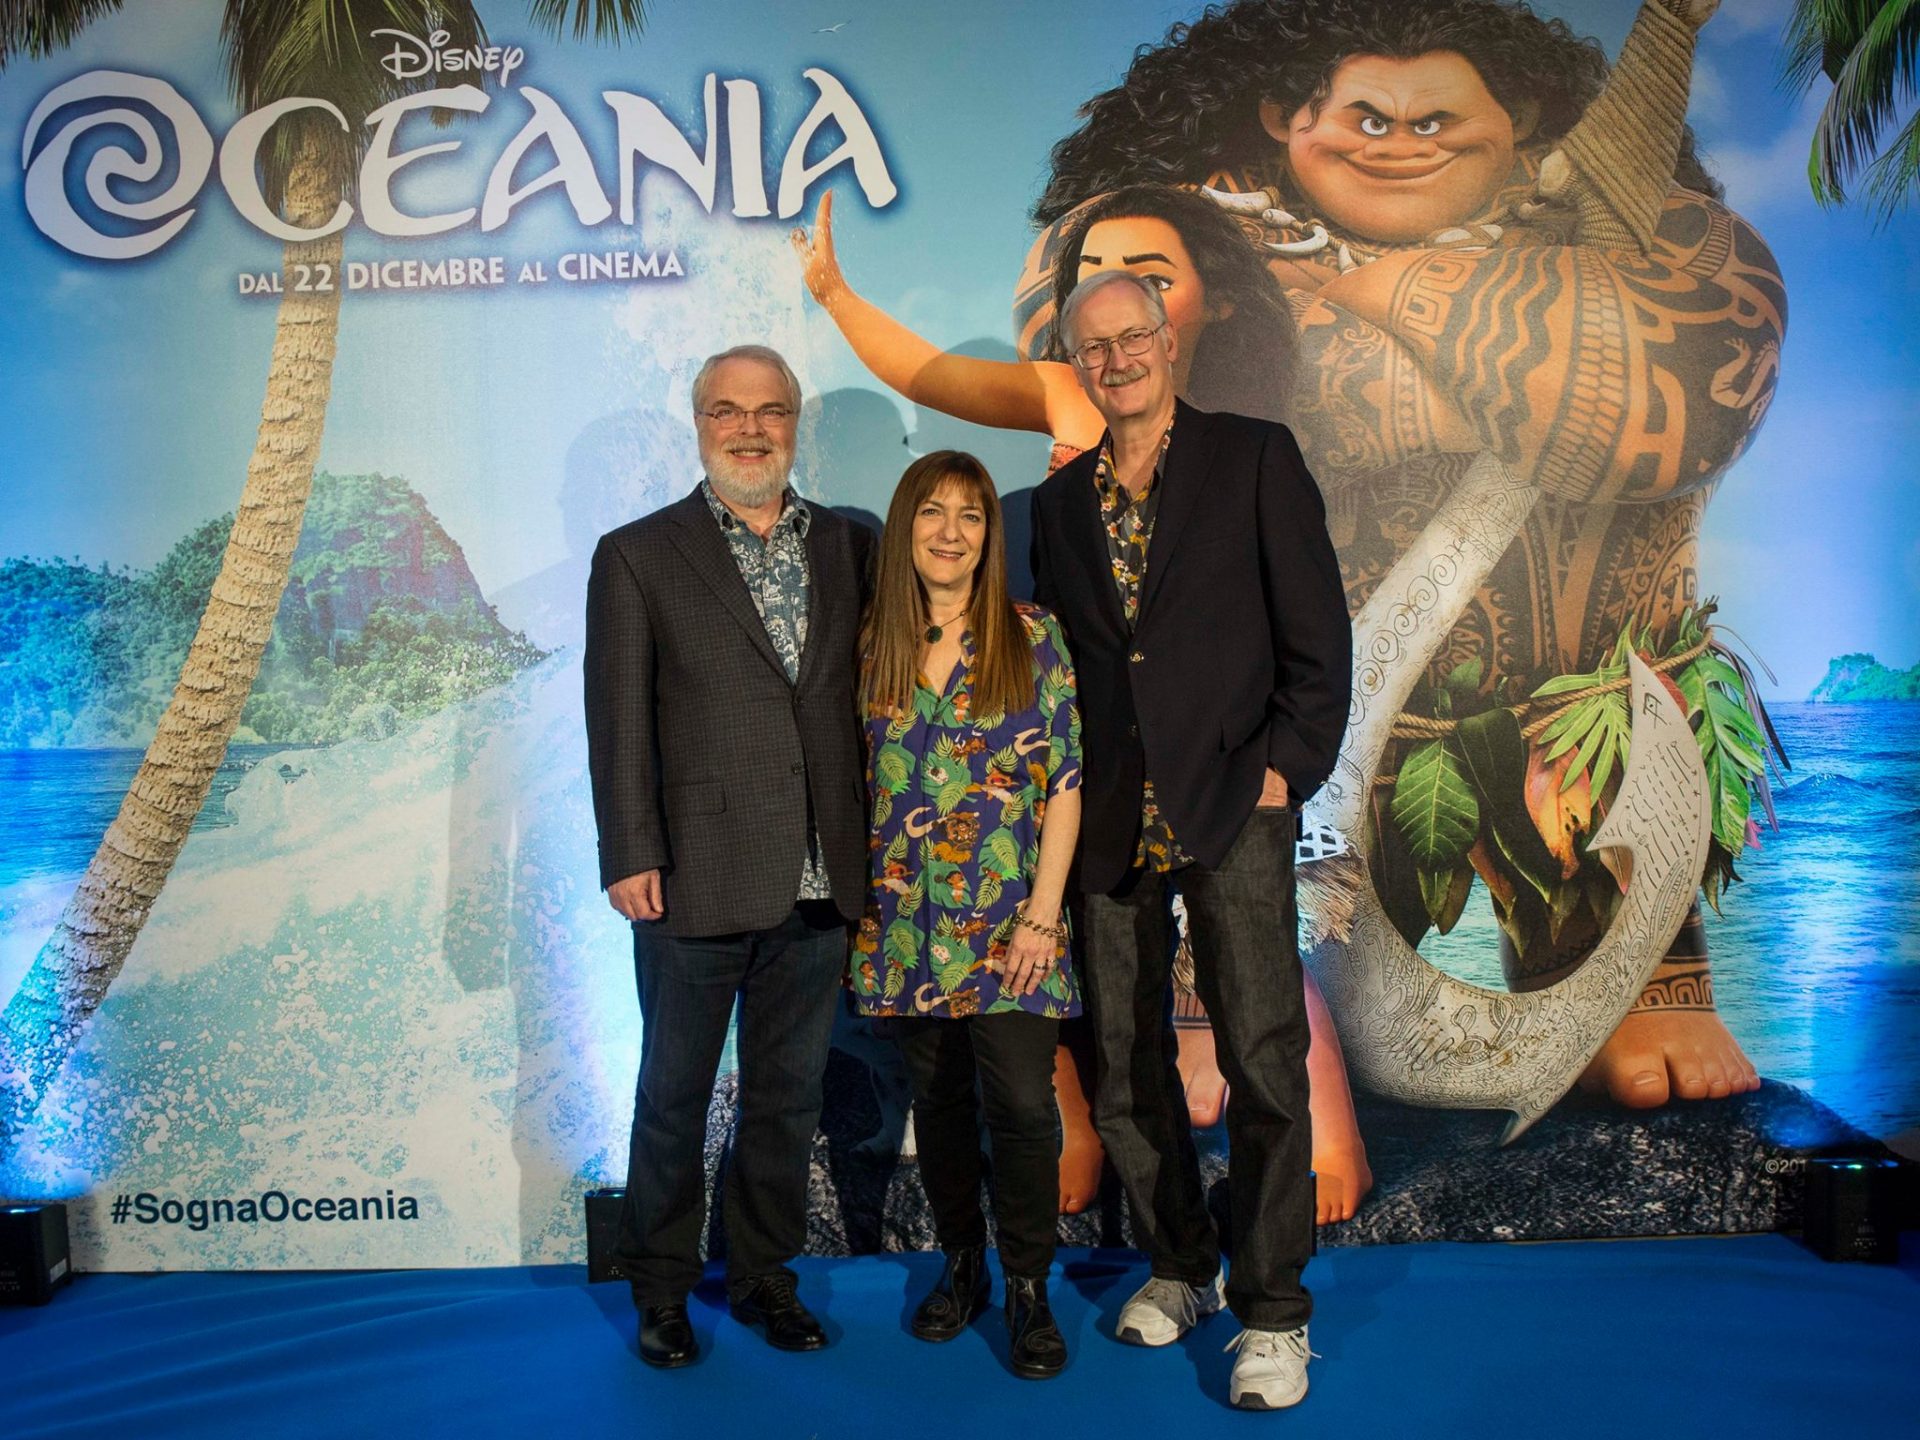 Ron Clements, Osnat Shurer and John Musker Italian preview of Oceania